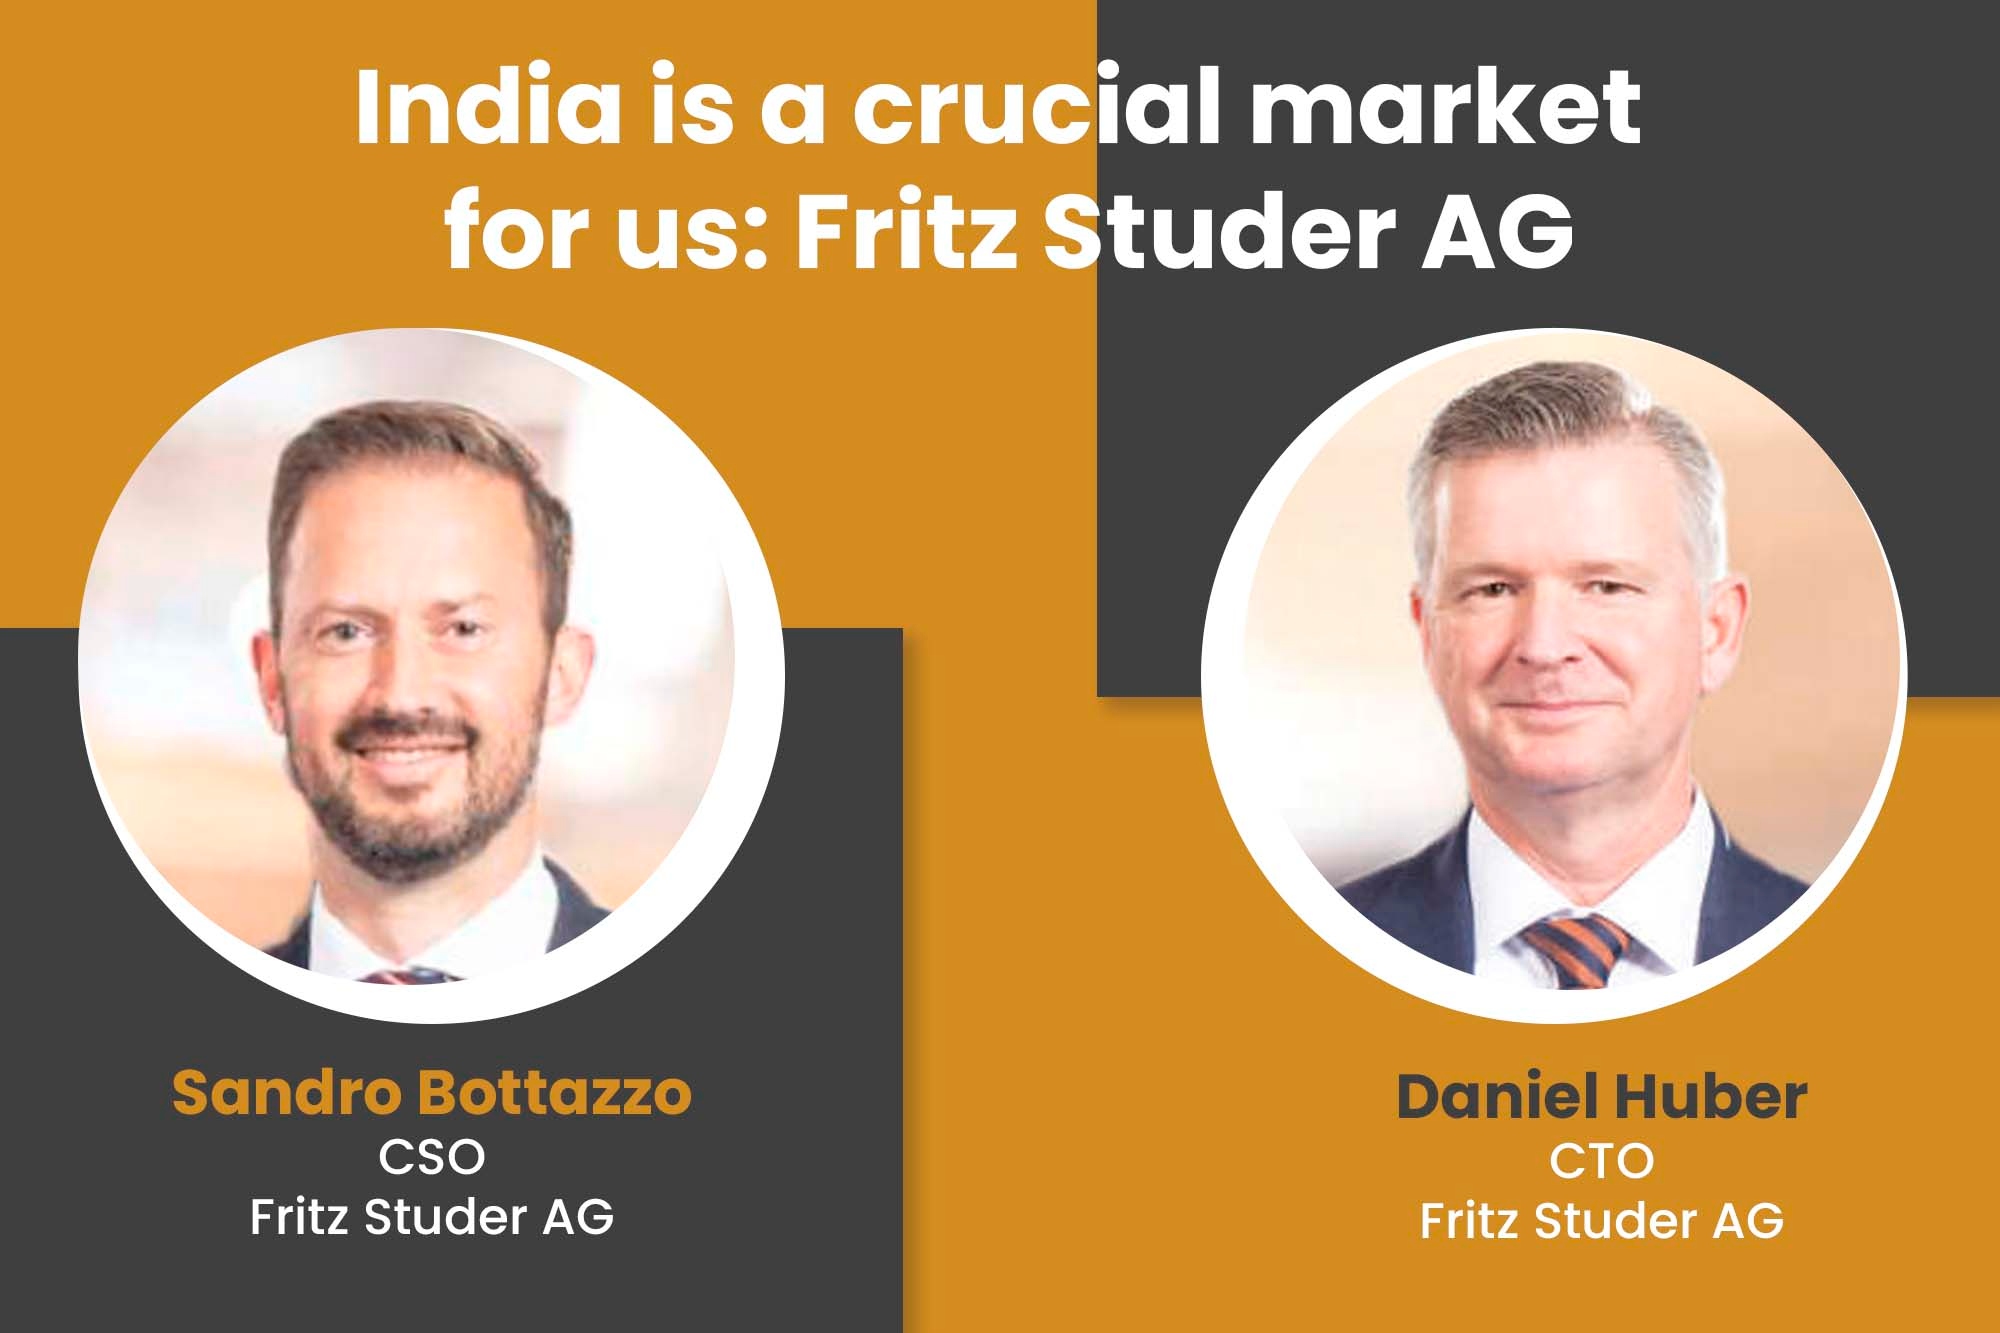 India is a crucial market for us: Fritz Studer AG